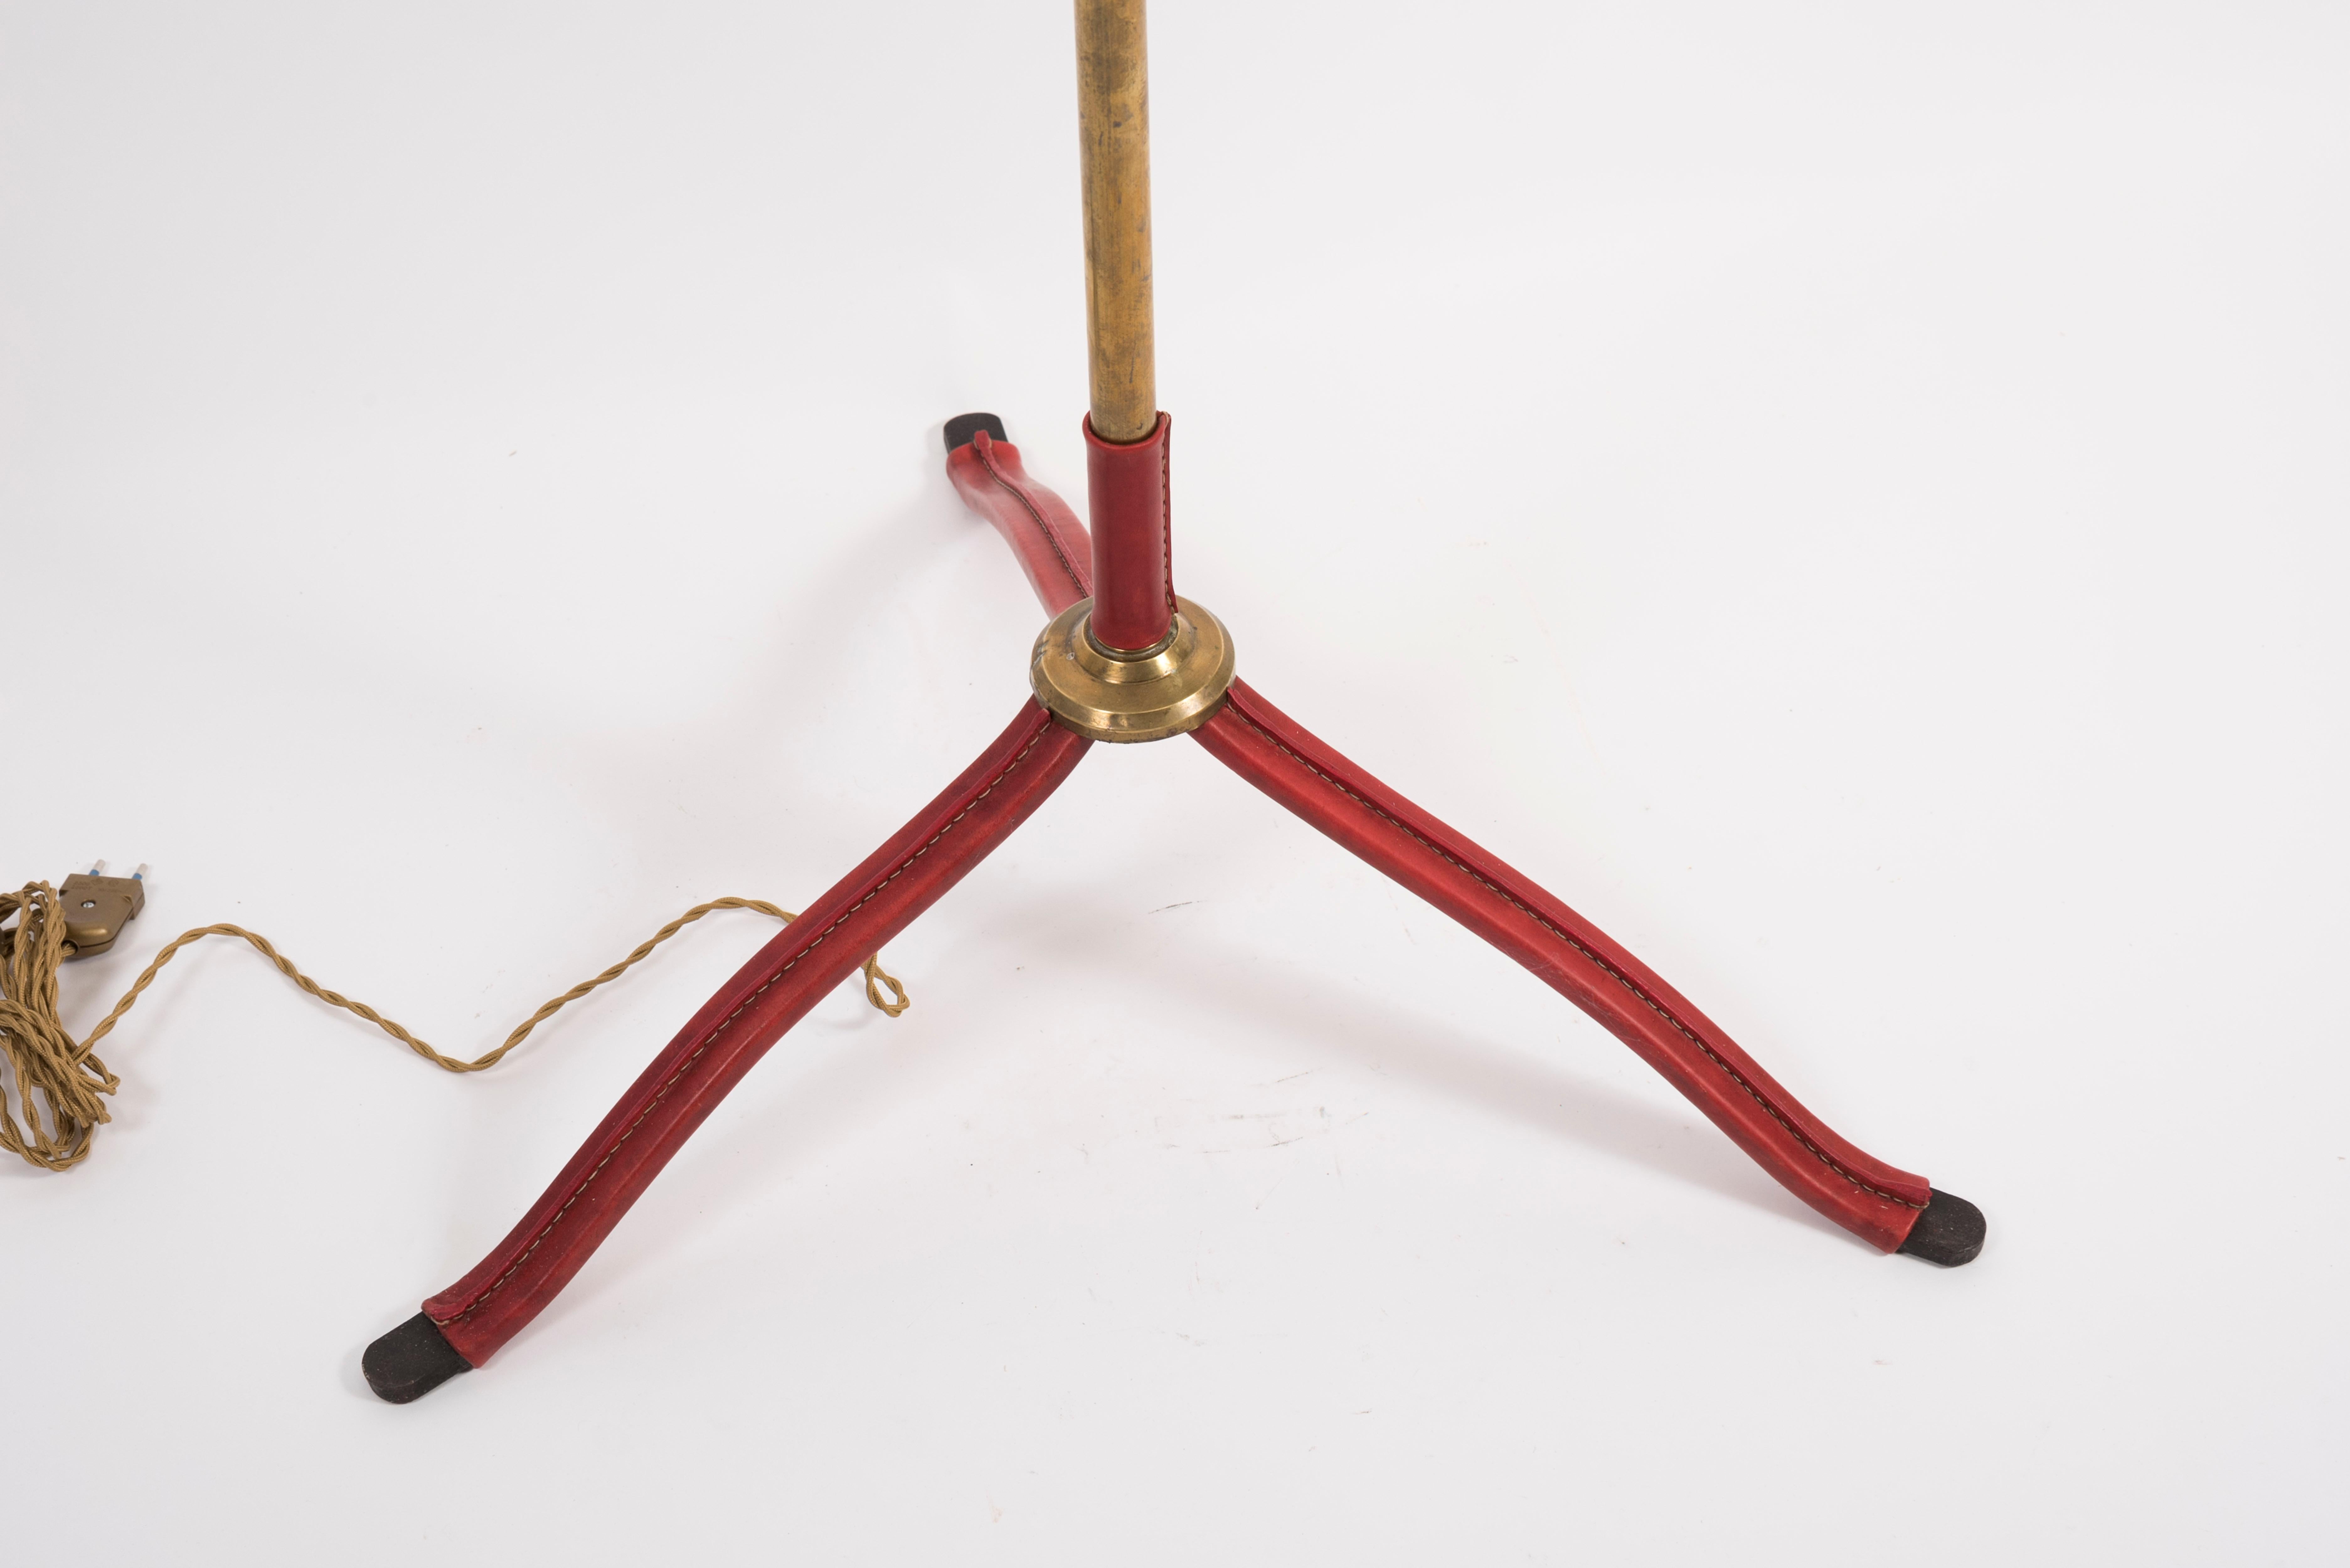 European 1950's Stitched Leather Floor Lamp by Jacques Adnet For Sale